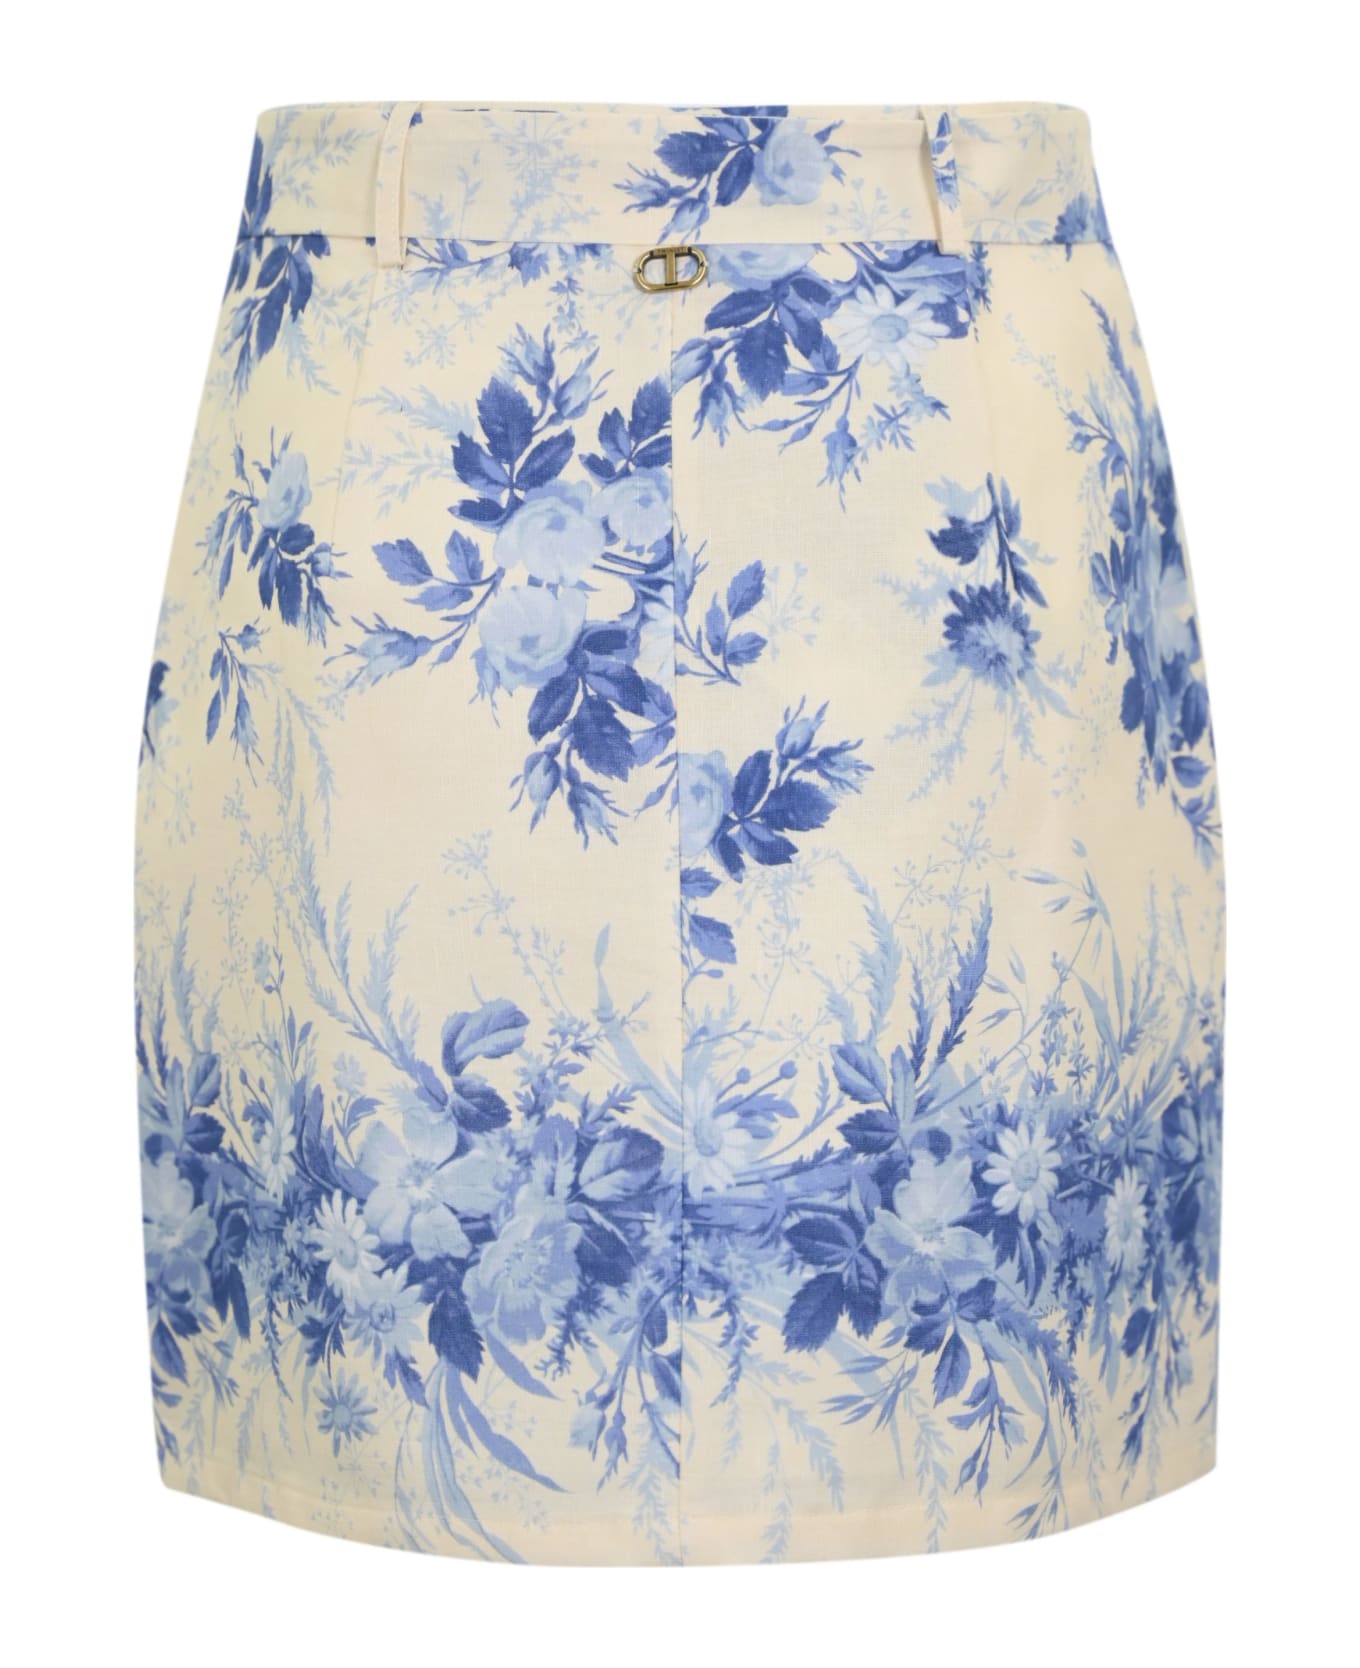 TwinSet Linen Skirt With Print - St.toile de jouy